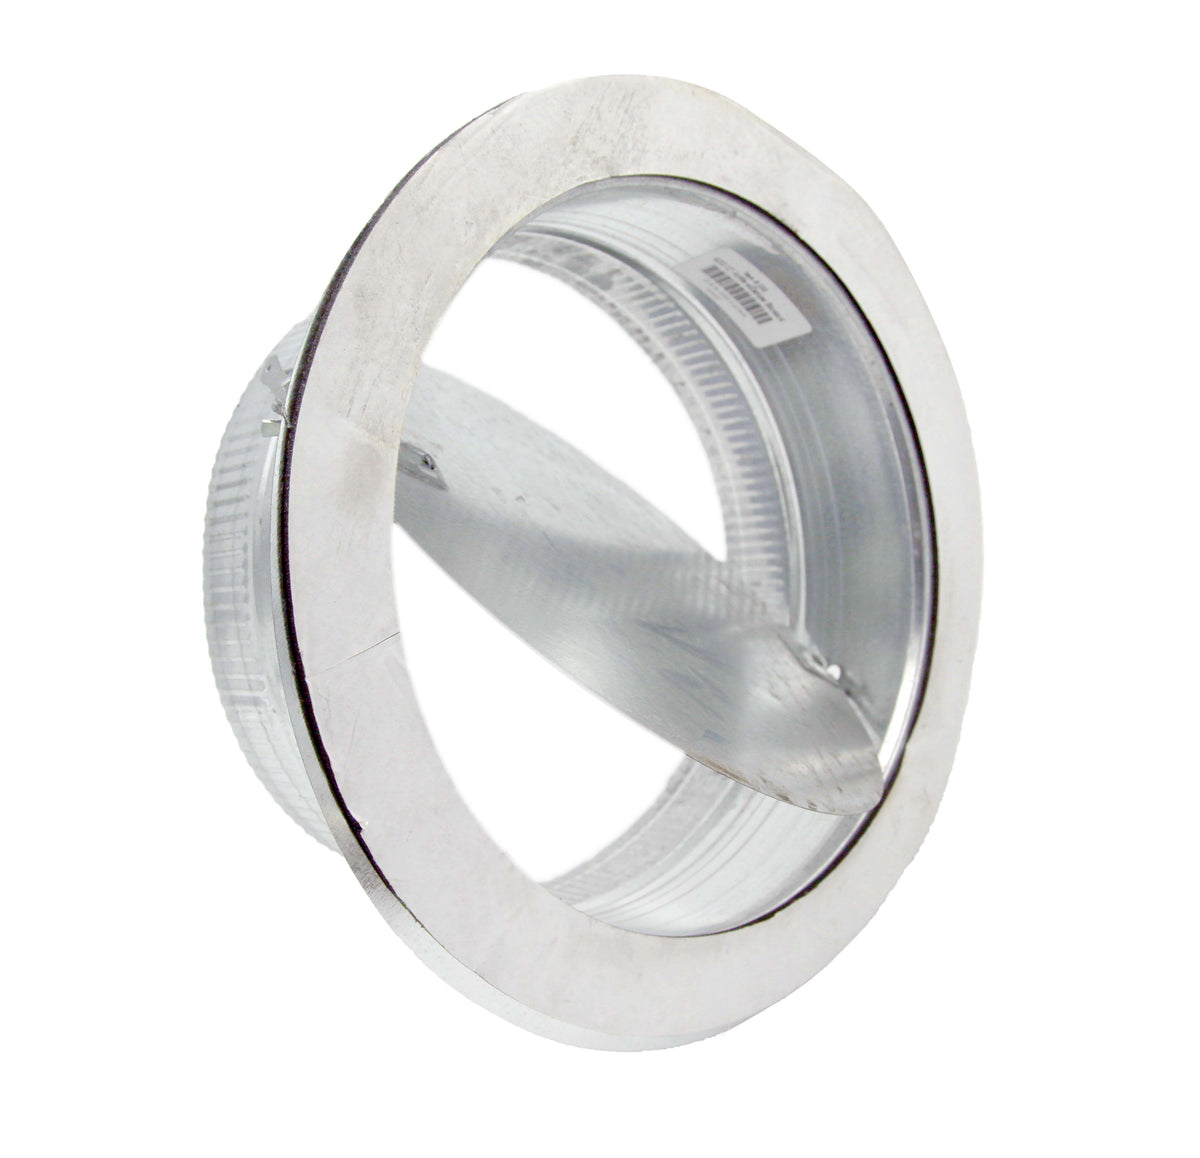 Stick-on Collar Duct with Damper | Galvanized Steel Metal Collar Duct with Damper 30 Gauge | 10&quot; Stick on Collar w/Damper is Compatible with Duct 10&quot;